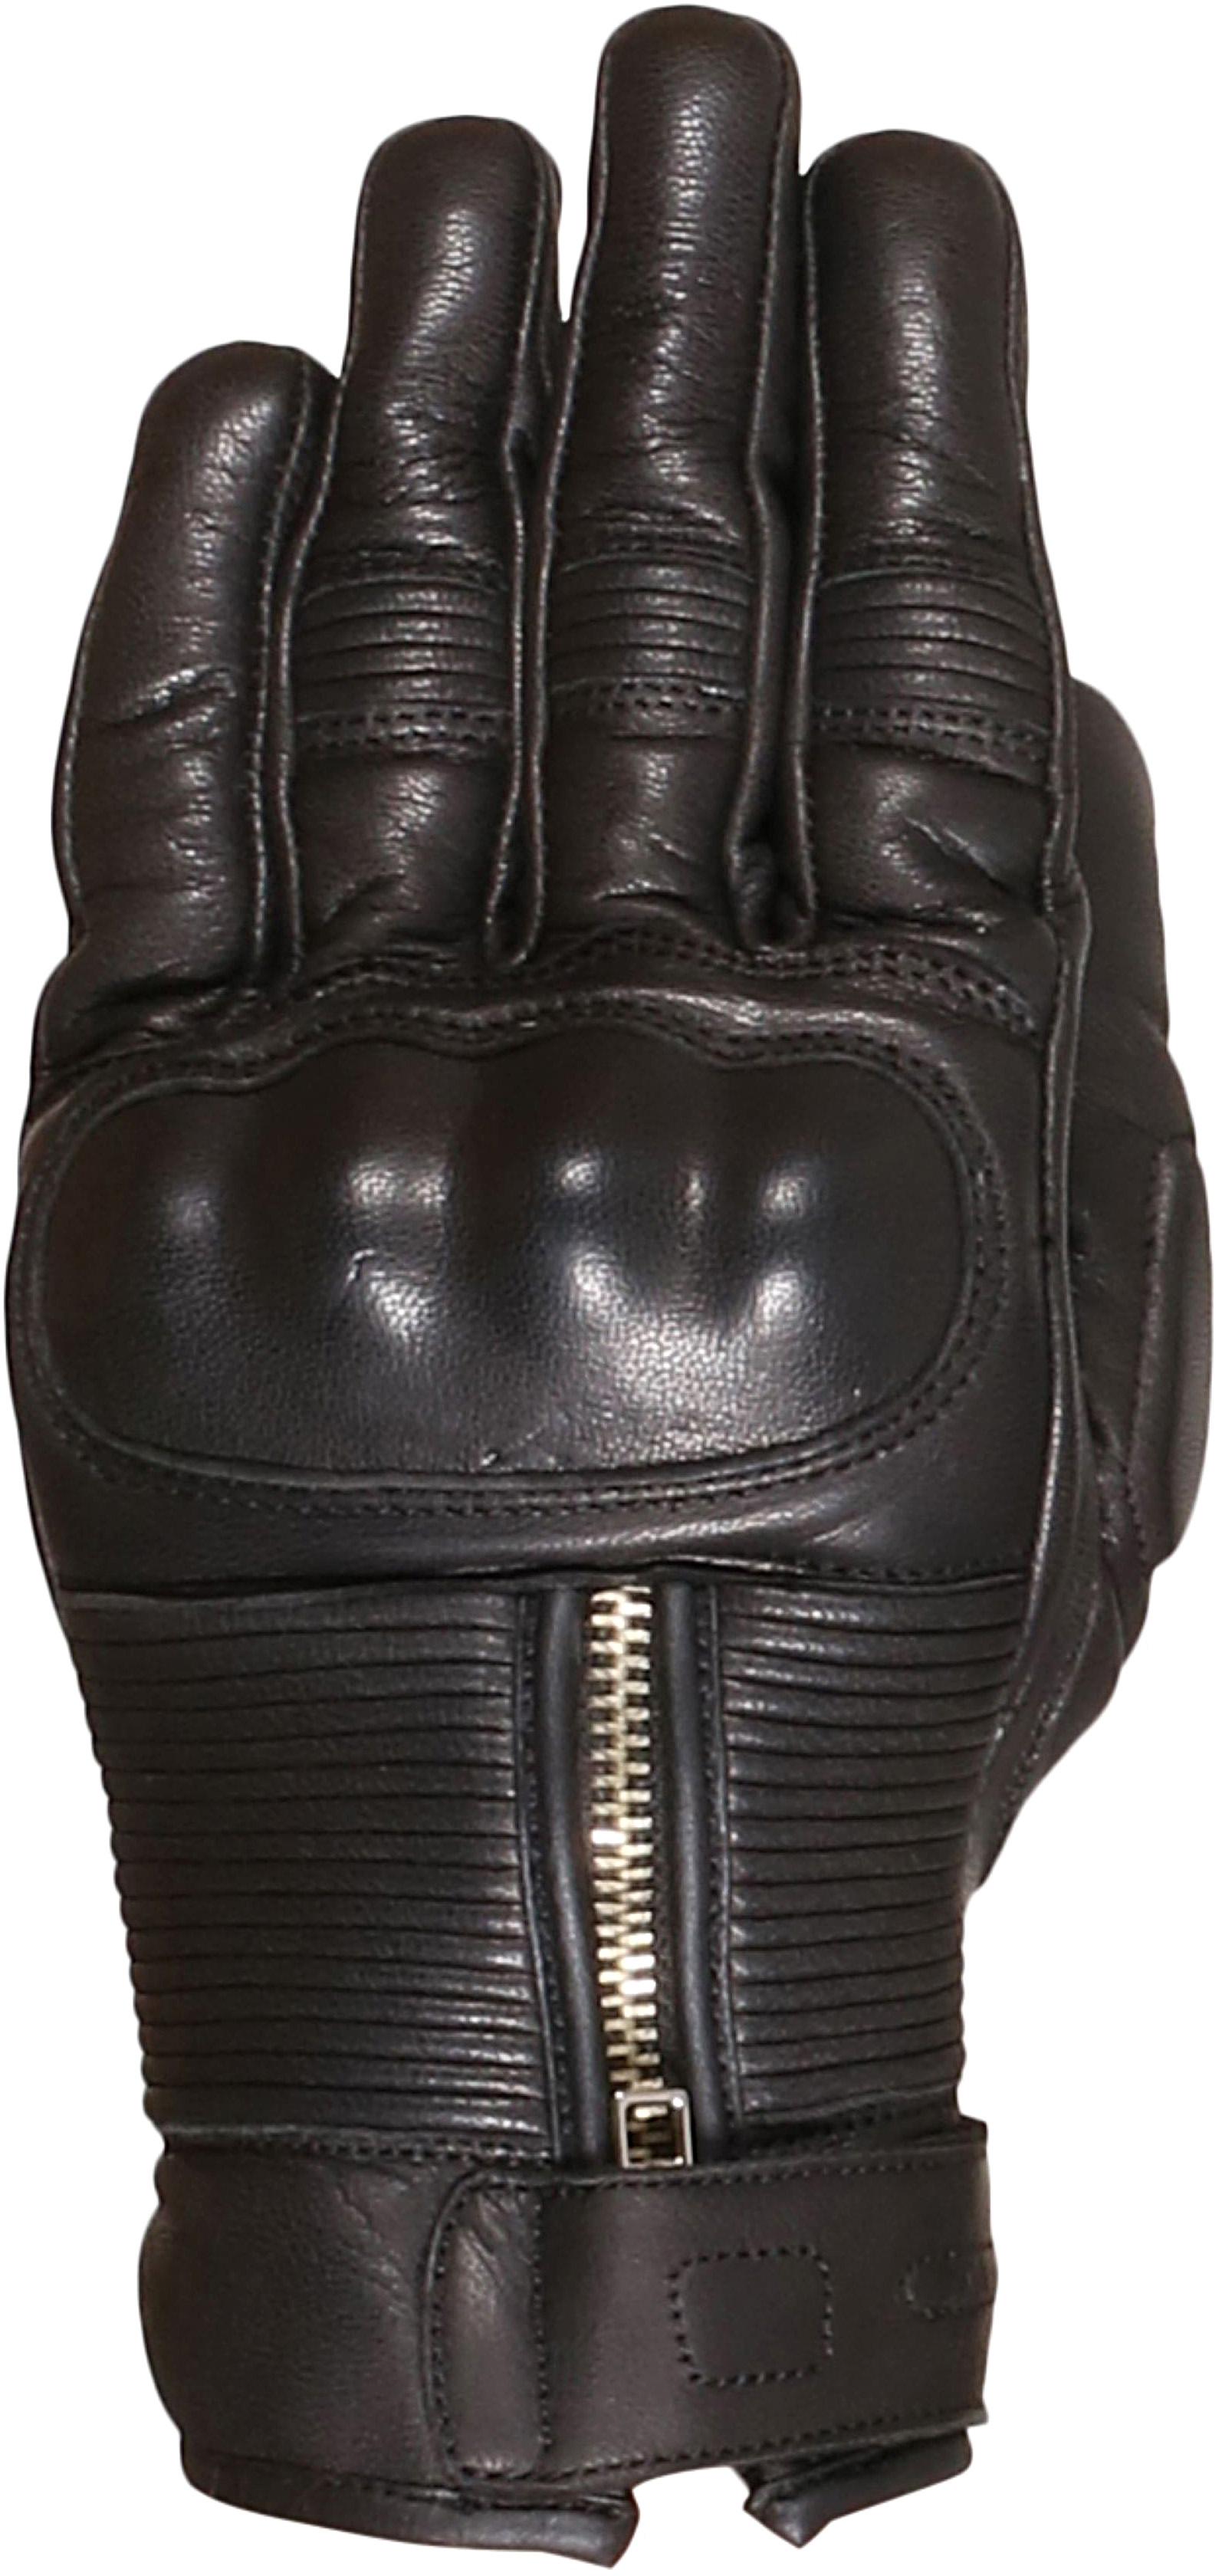 Weise Union Motorcycle Gloves - Black, S